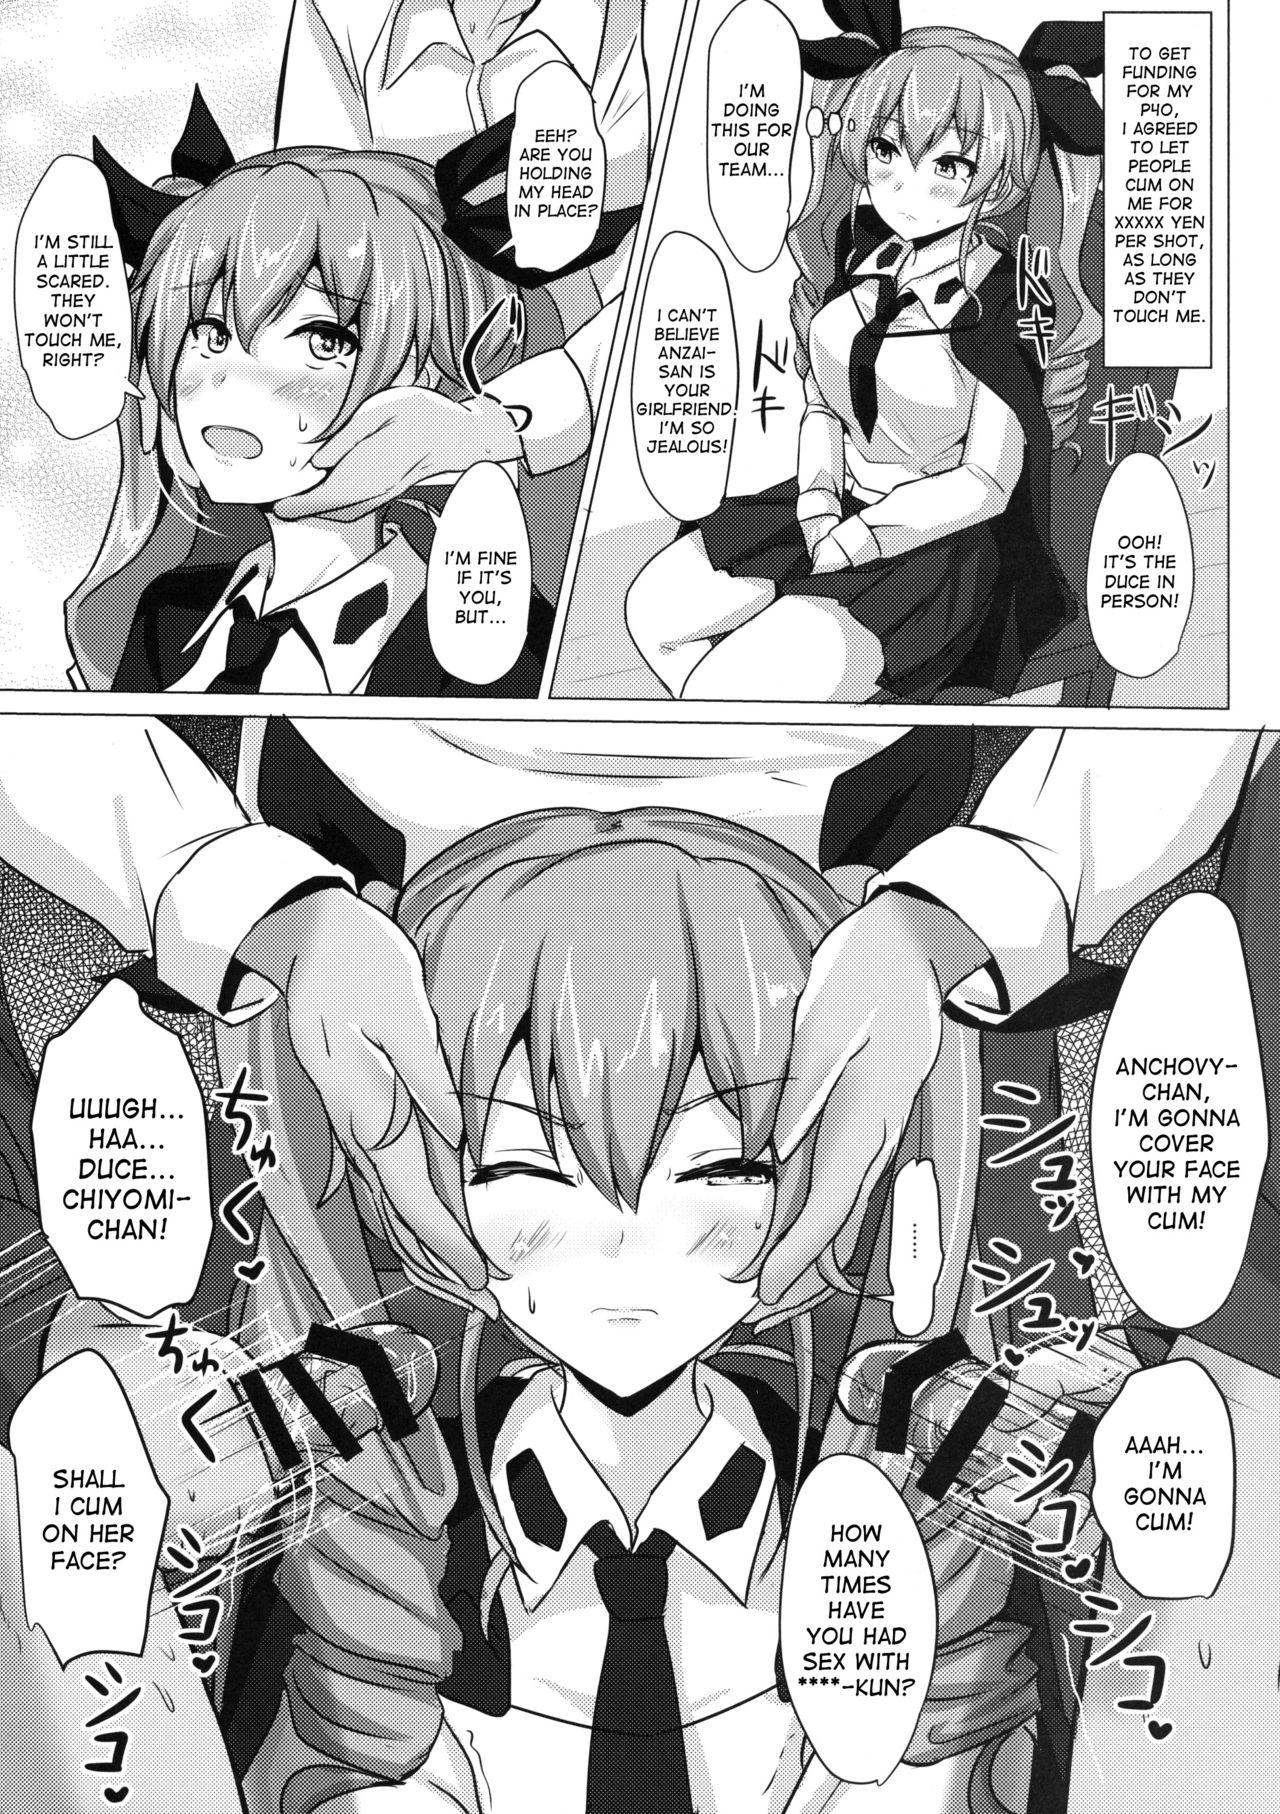 Bubble Anchovy Nee-san White Sauce Zoe - Girls und panzer Fingering - Page 7